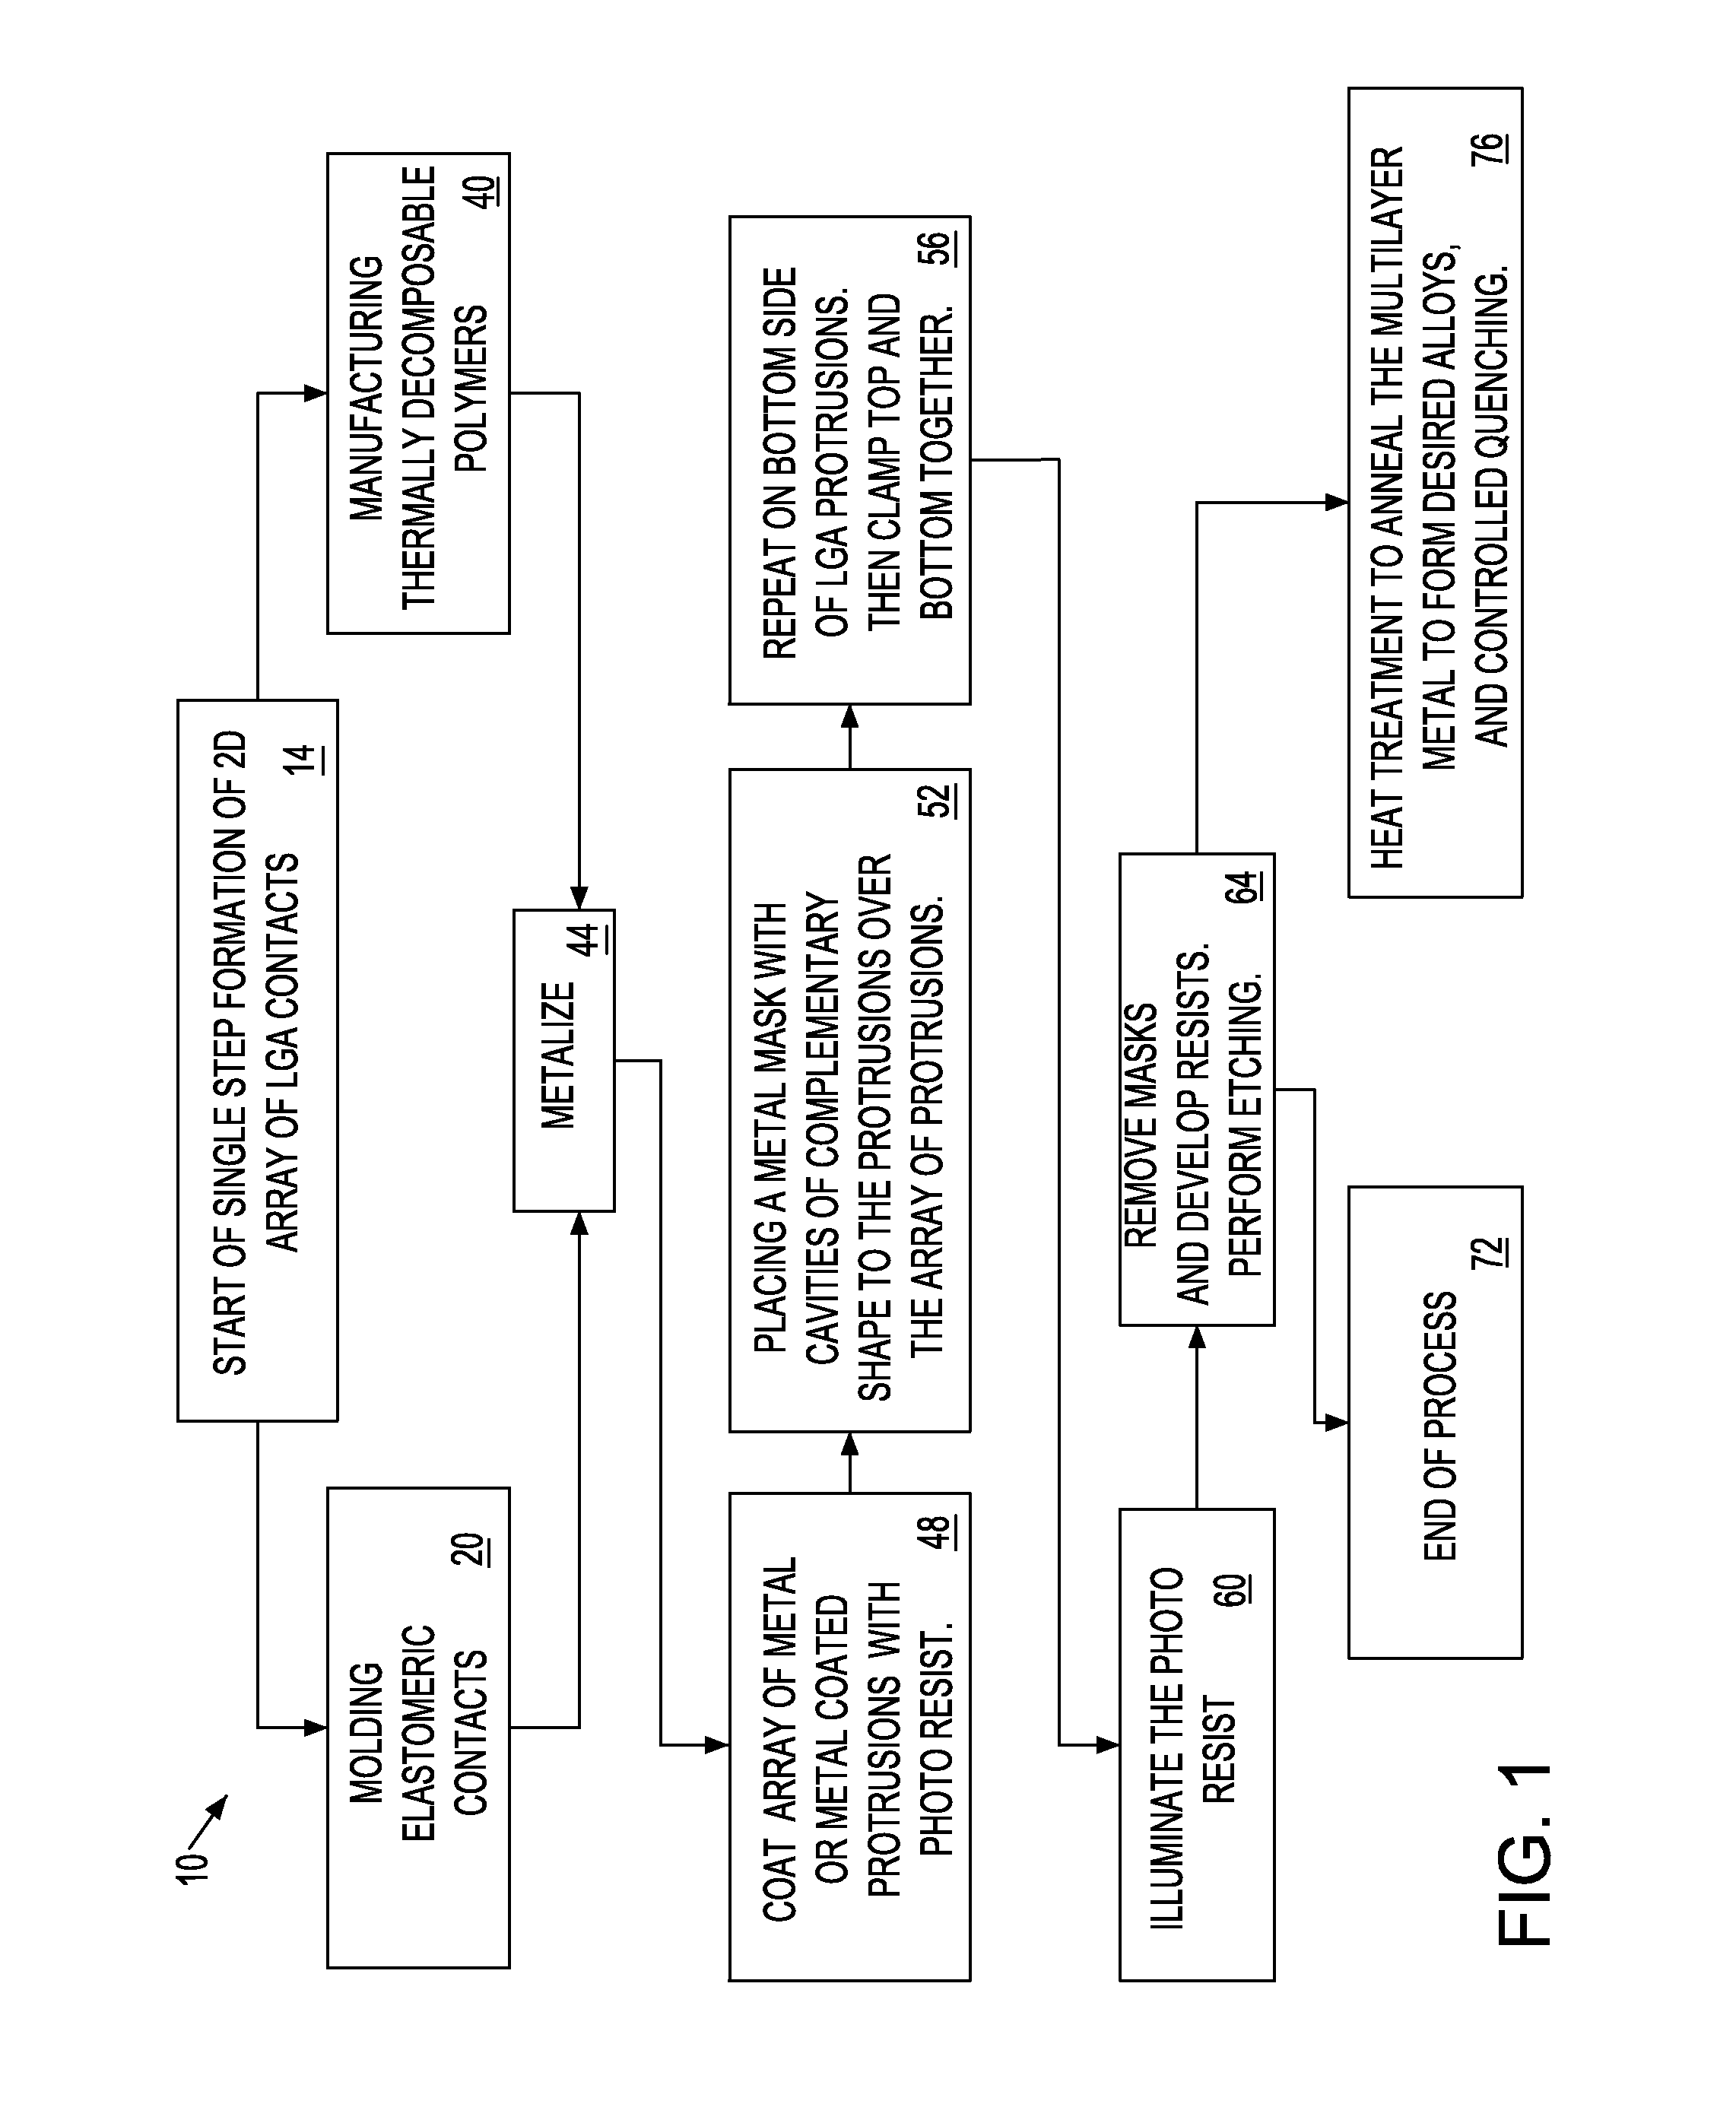 Axiocentric scrubbing land grid array contacts and methods for fabrication